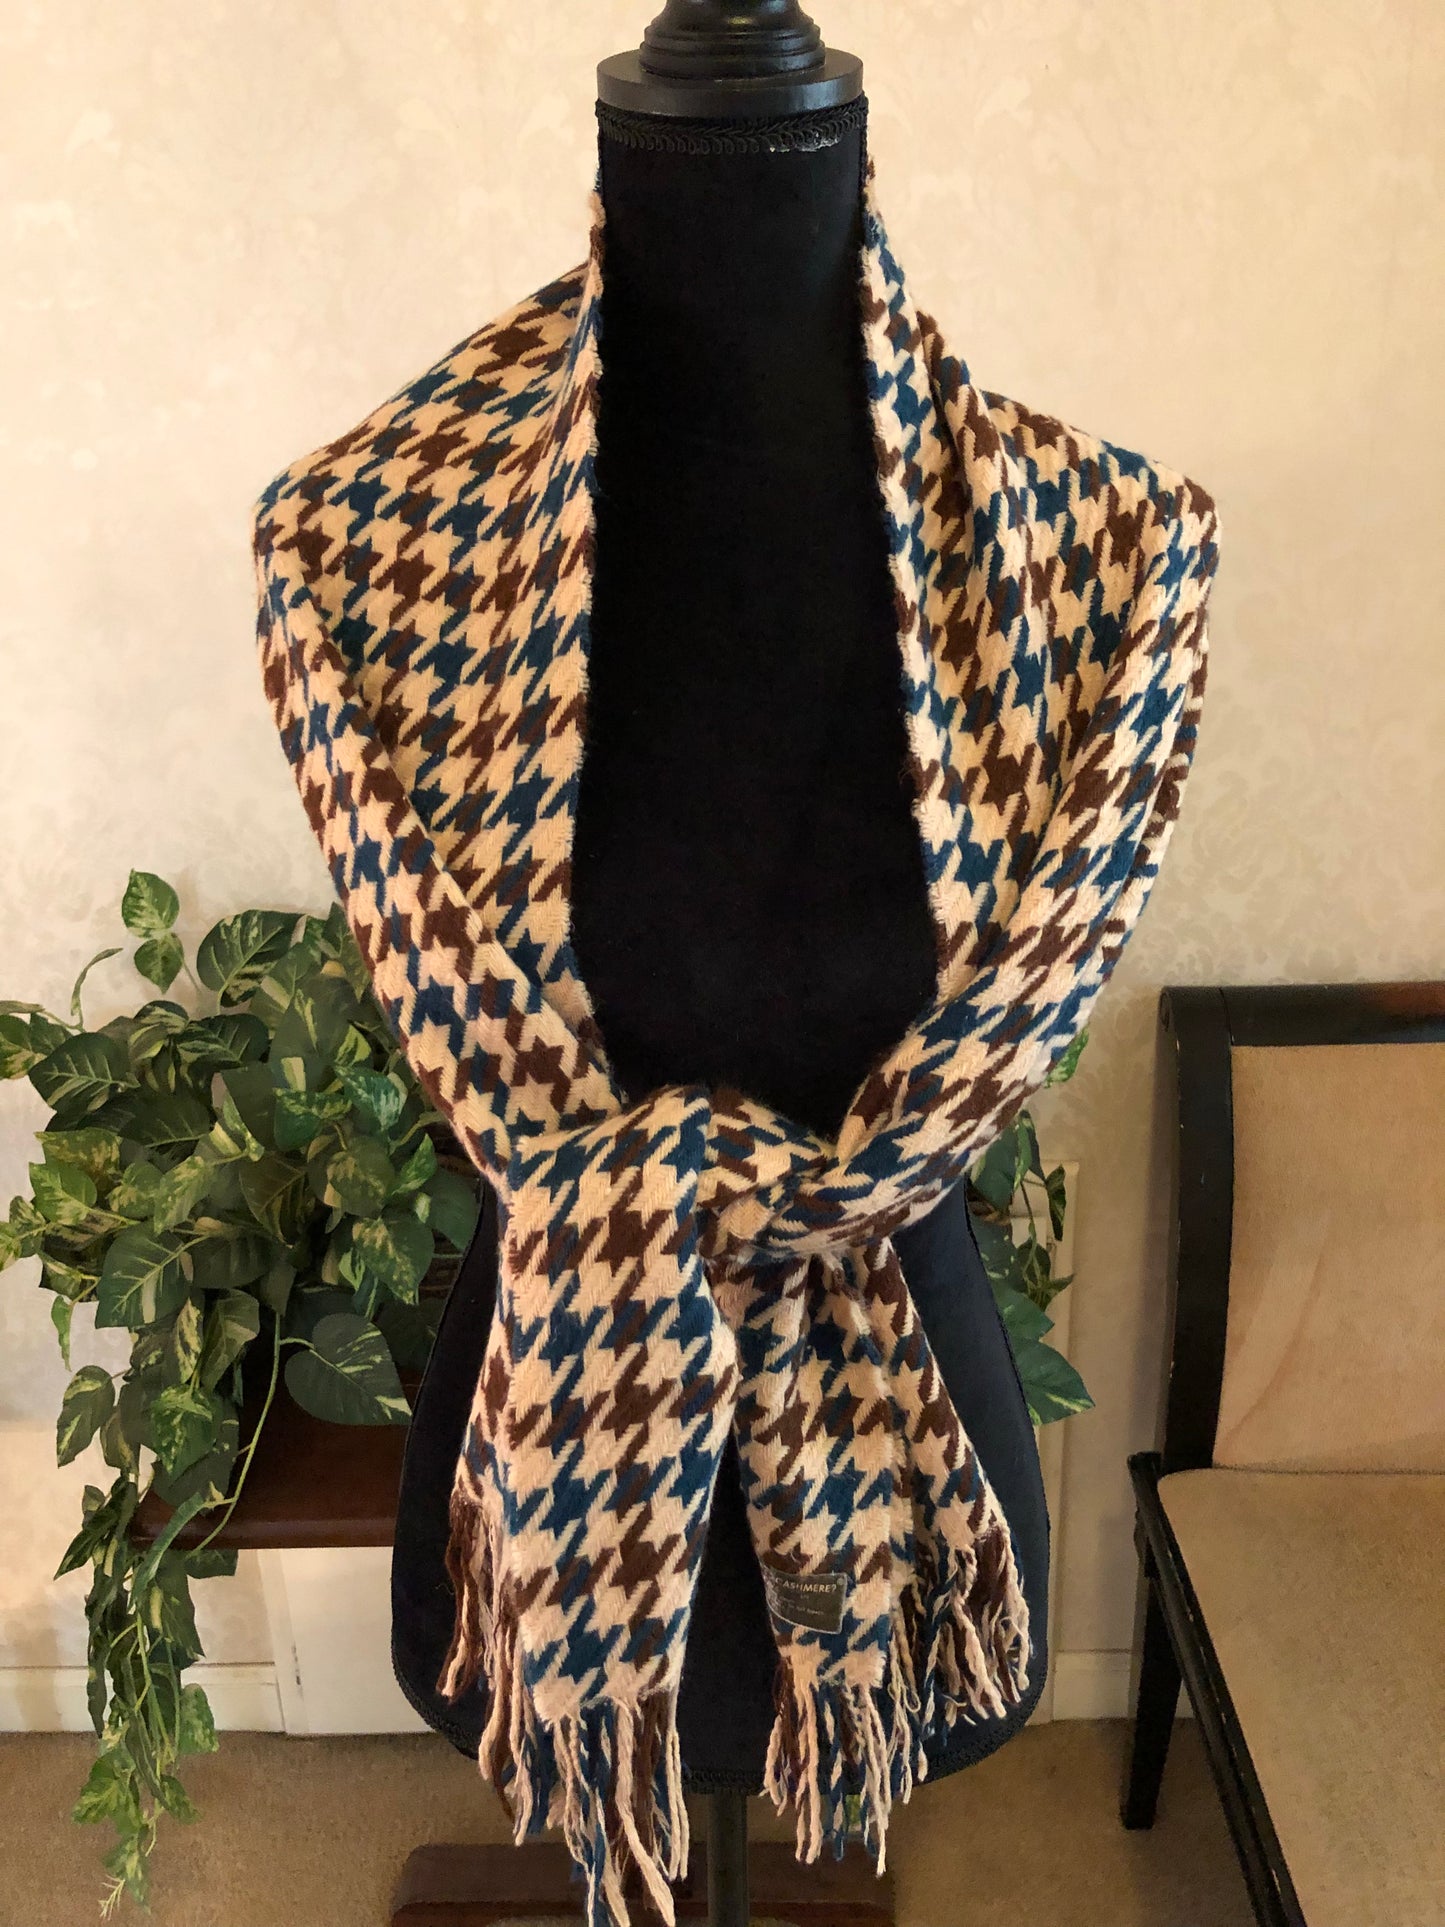 Cashmere Neck Scarves/Shawls & Coordinated Hat, 3 Choices